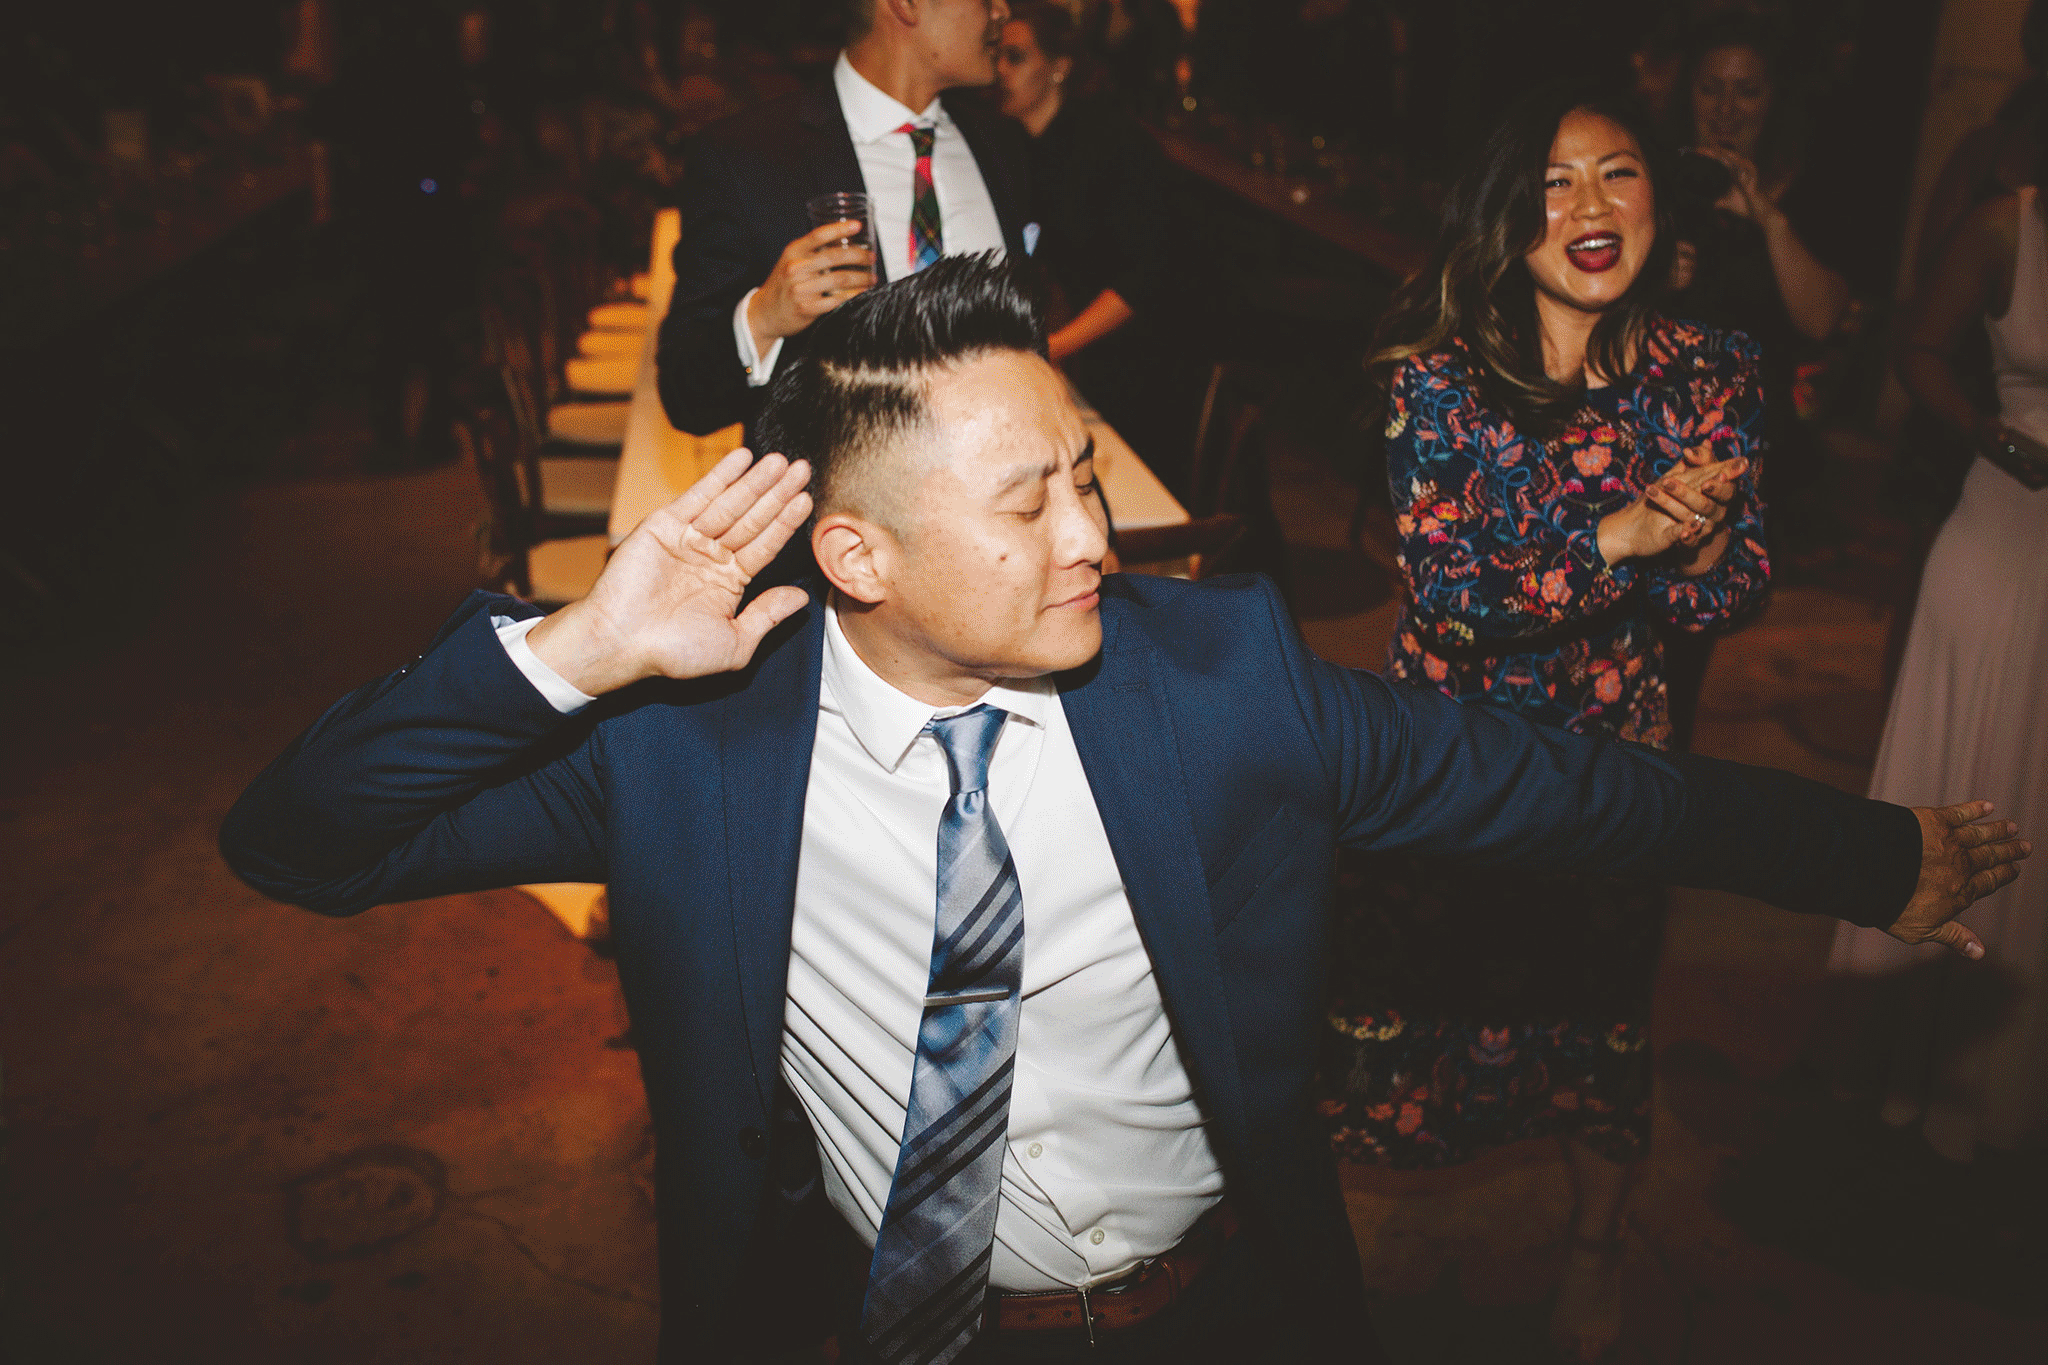 Wedding dance party at Millwick Los Angeles